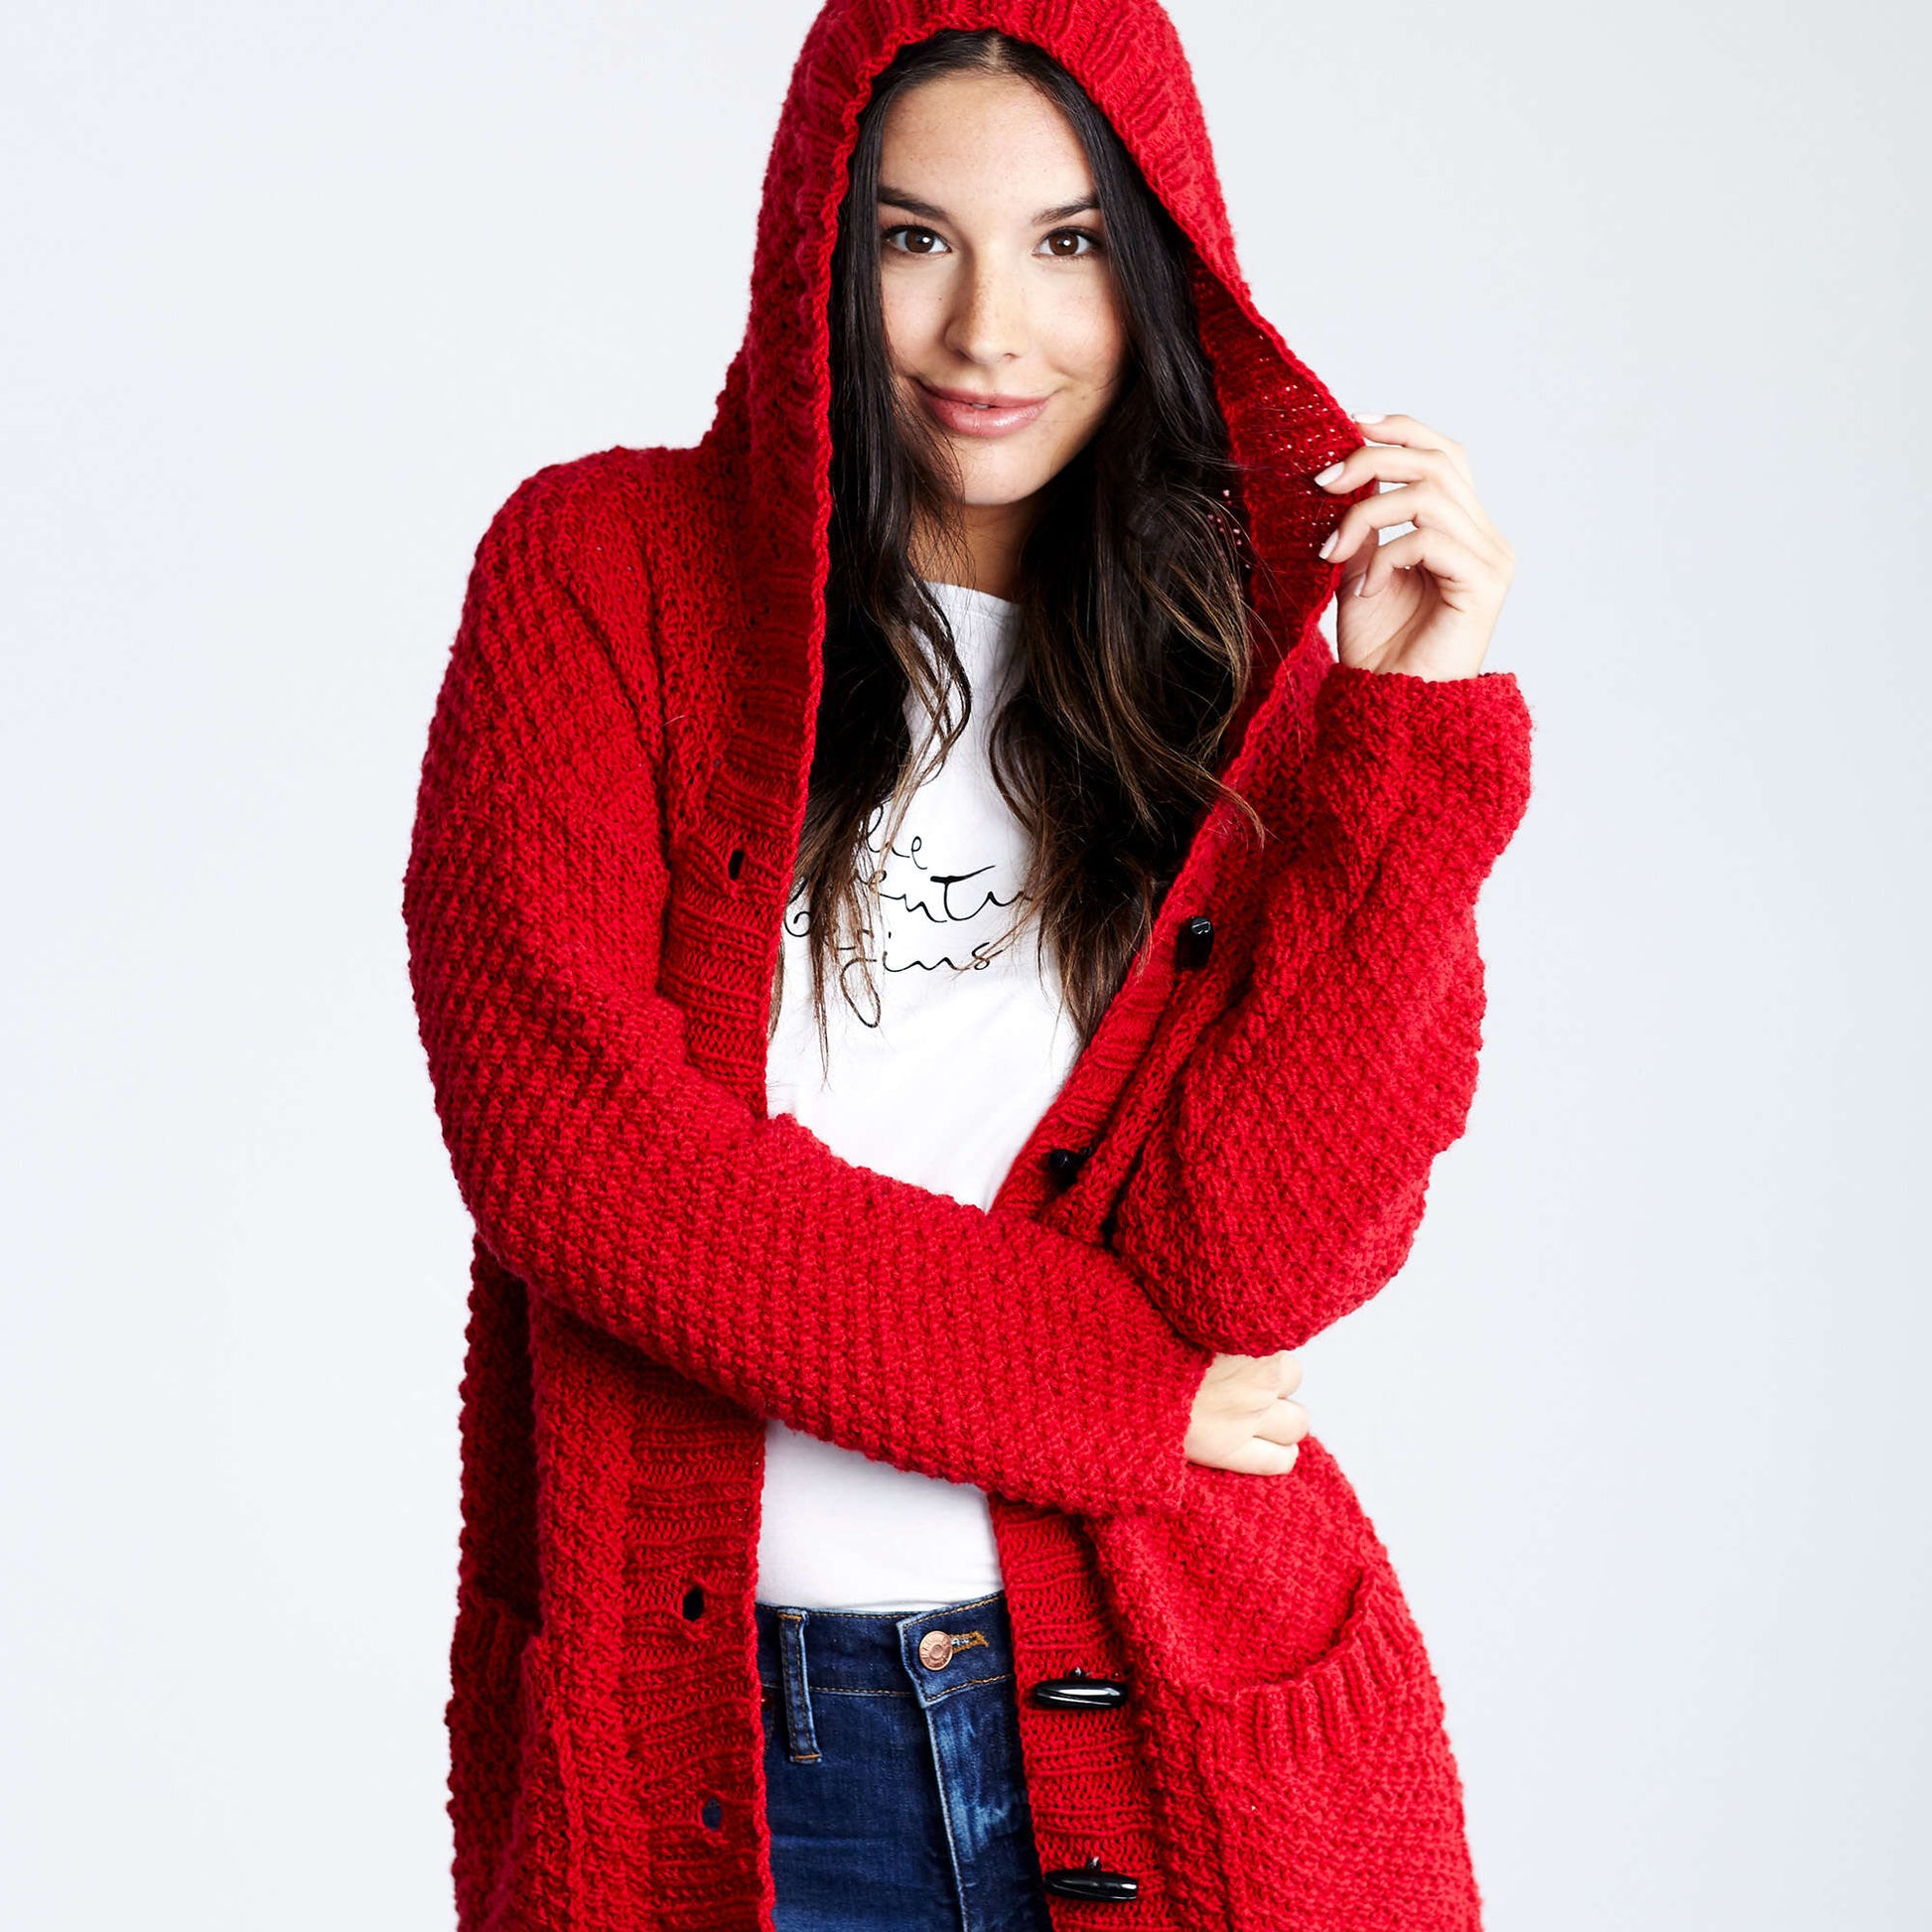 Free Red Heart Knit Lazy Day Chic Sweater Pattern